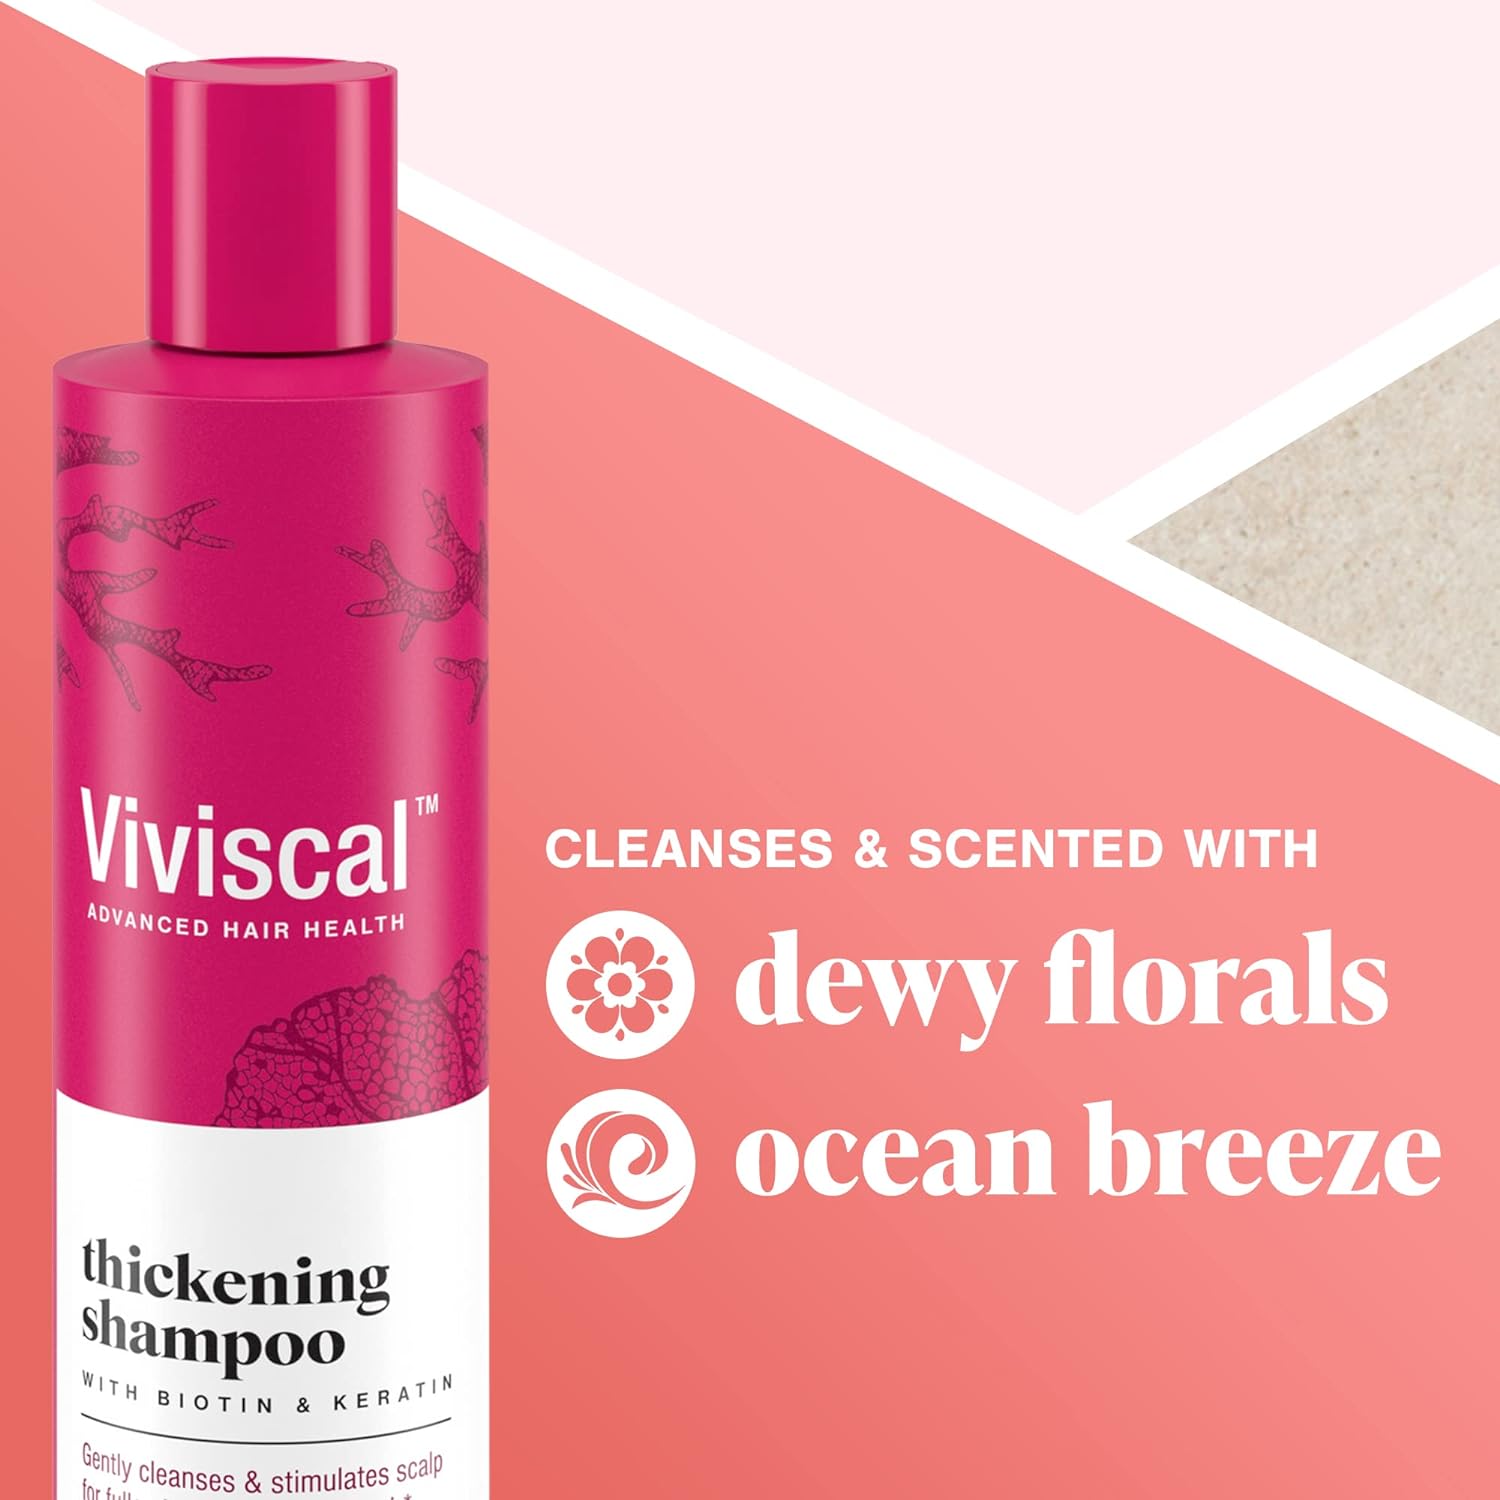 Viviscal thickening shampoo cleanses and scented with dewy florals and ocean breeze